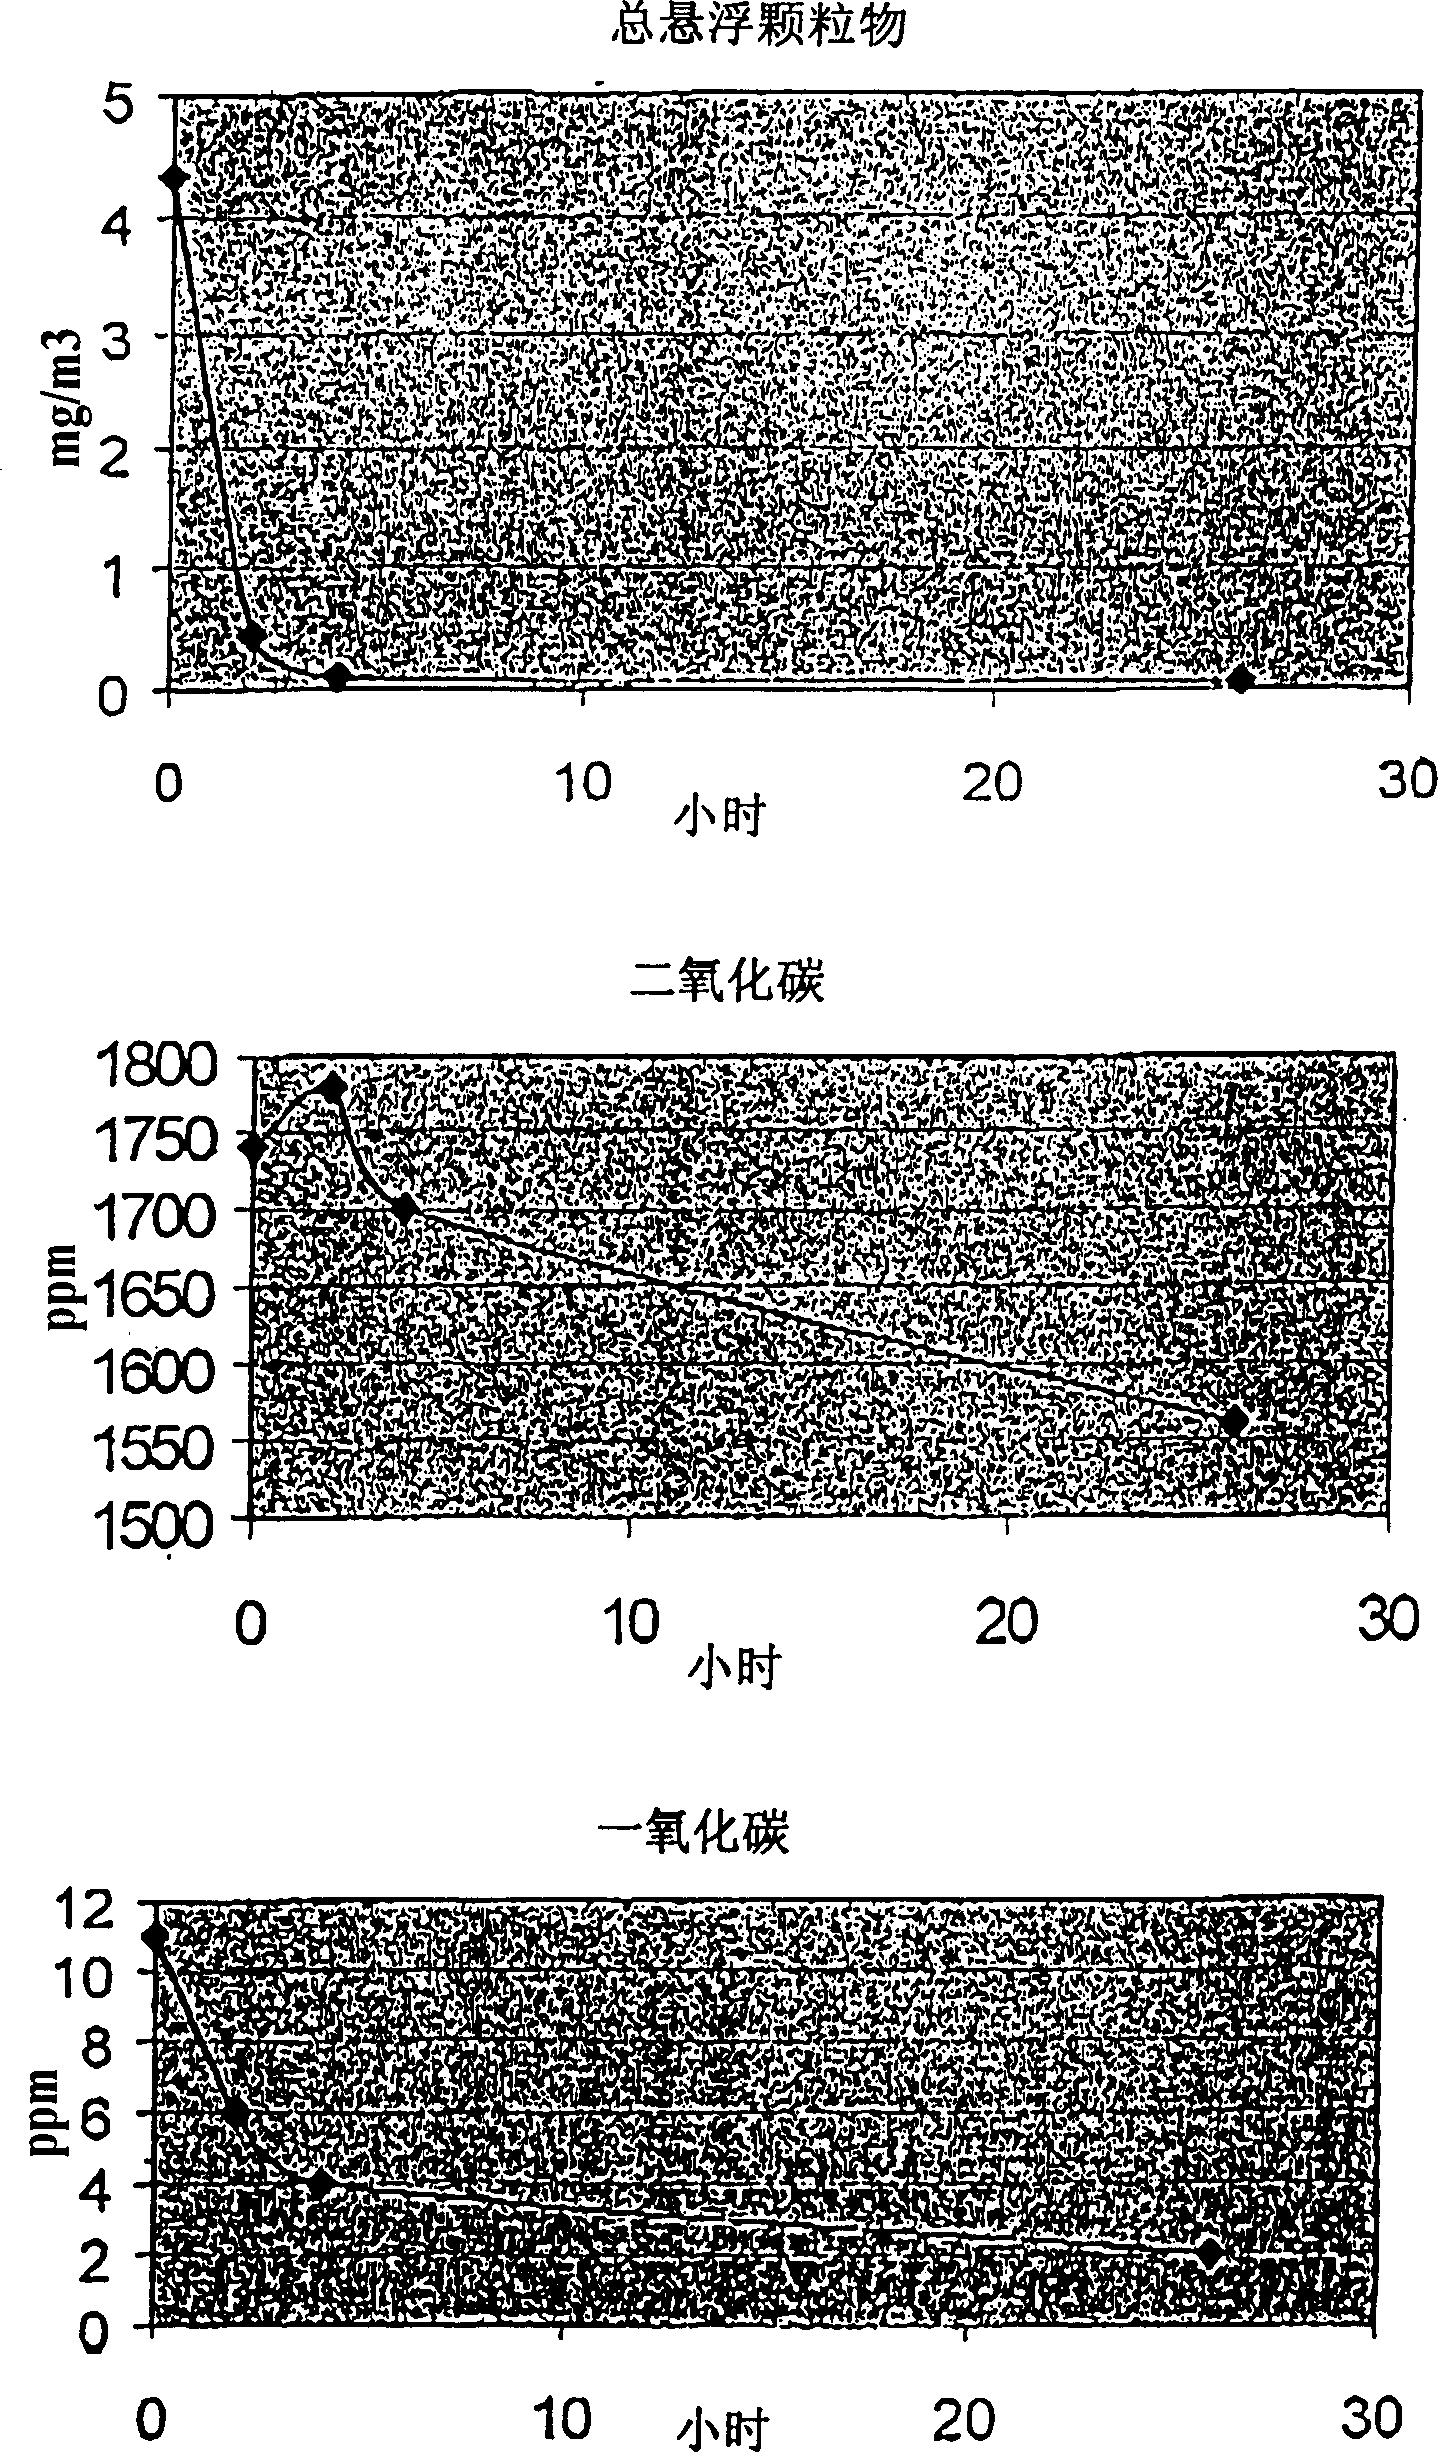 Method and apparatus for improving air quality within building or enelosed space